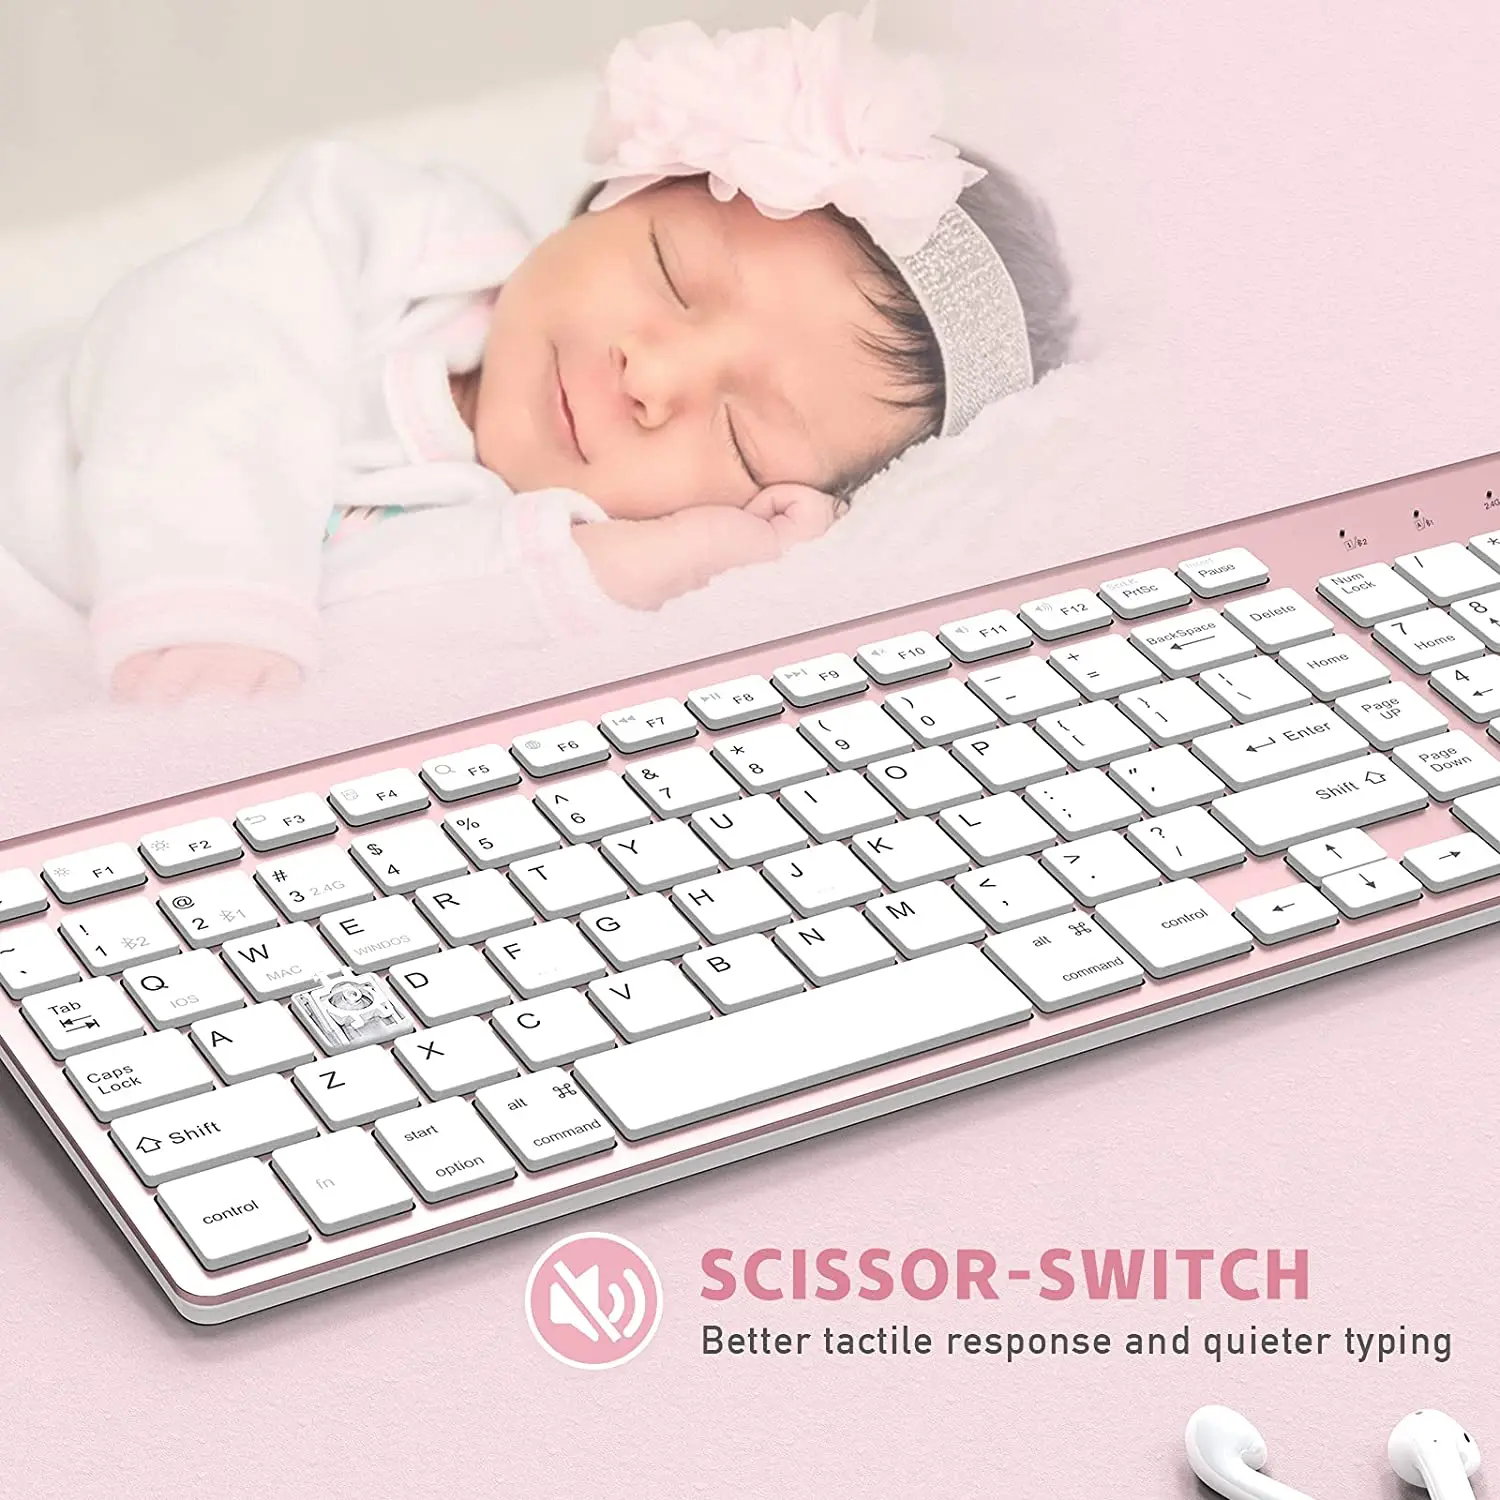 bluetooth keyboard compatible with windows and macos wireless bluetooth keyboard standard qwerty keyboard silver blue pink free global shipping